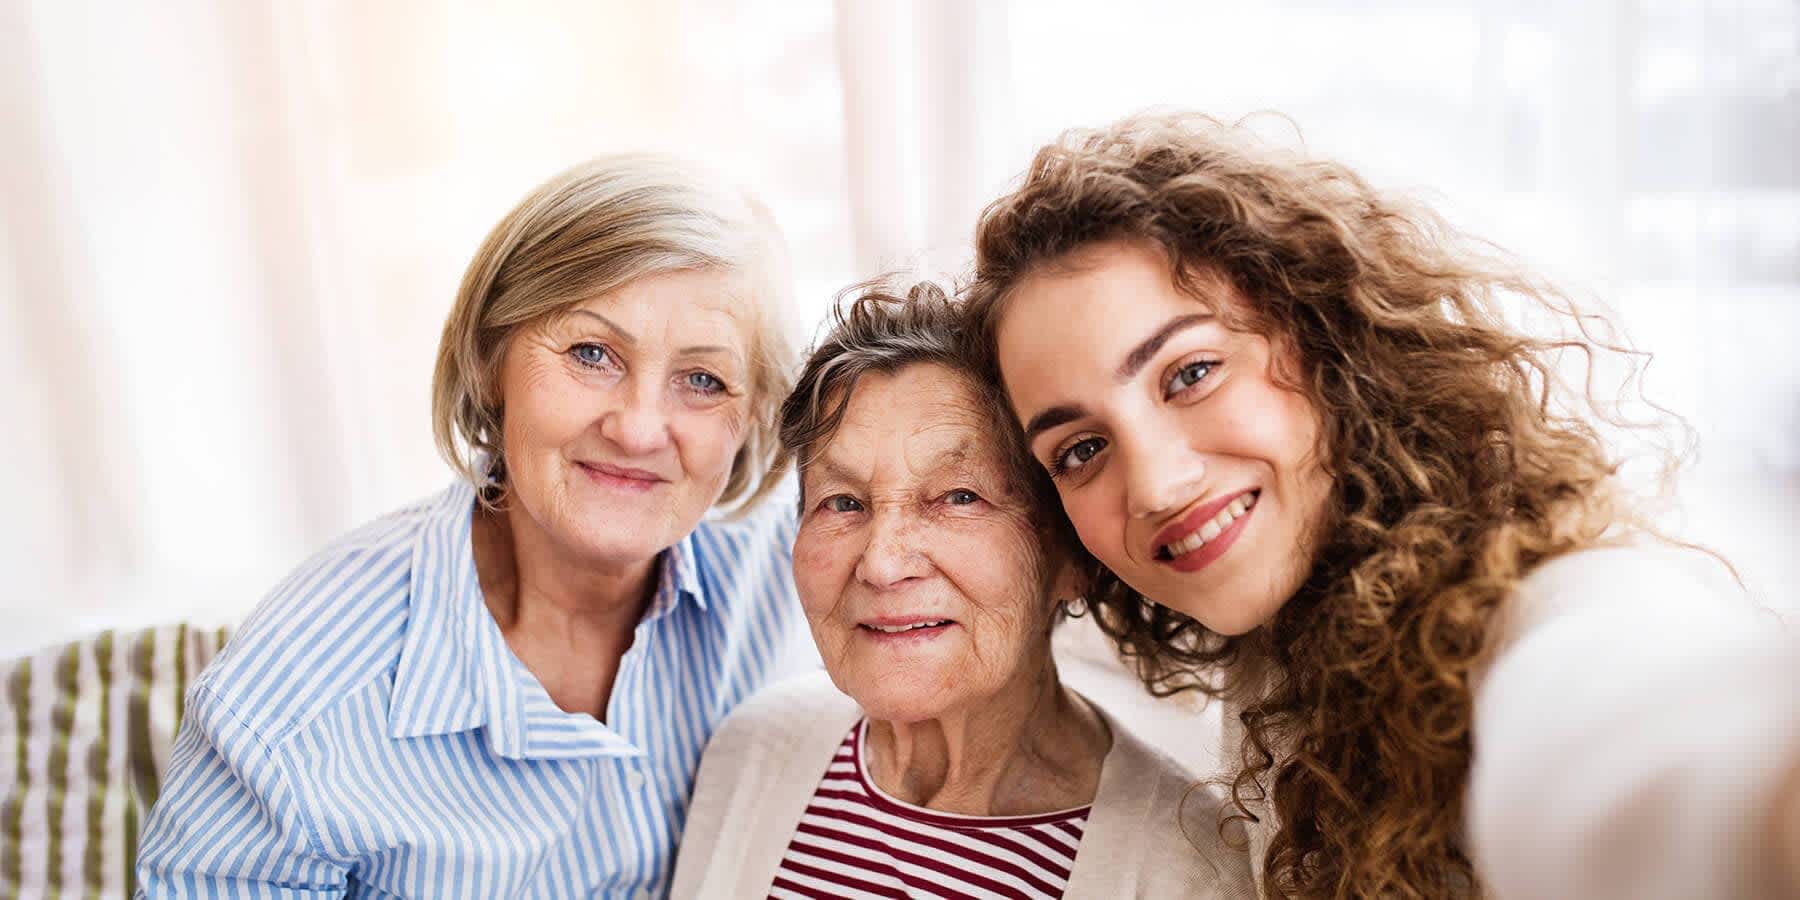 Daughter, mother, and grandmother smiling together to represent genetic inheritance